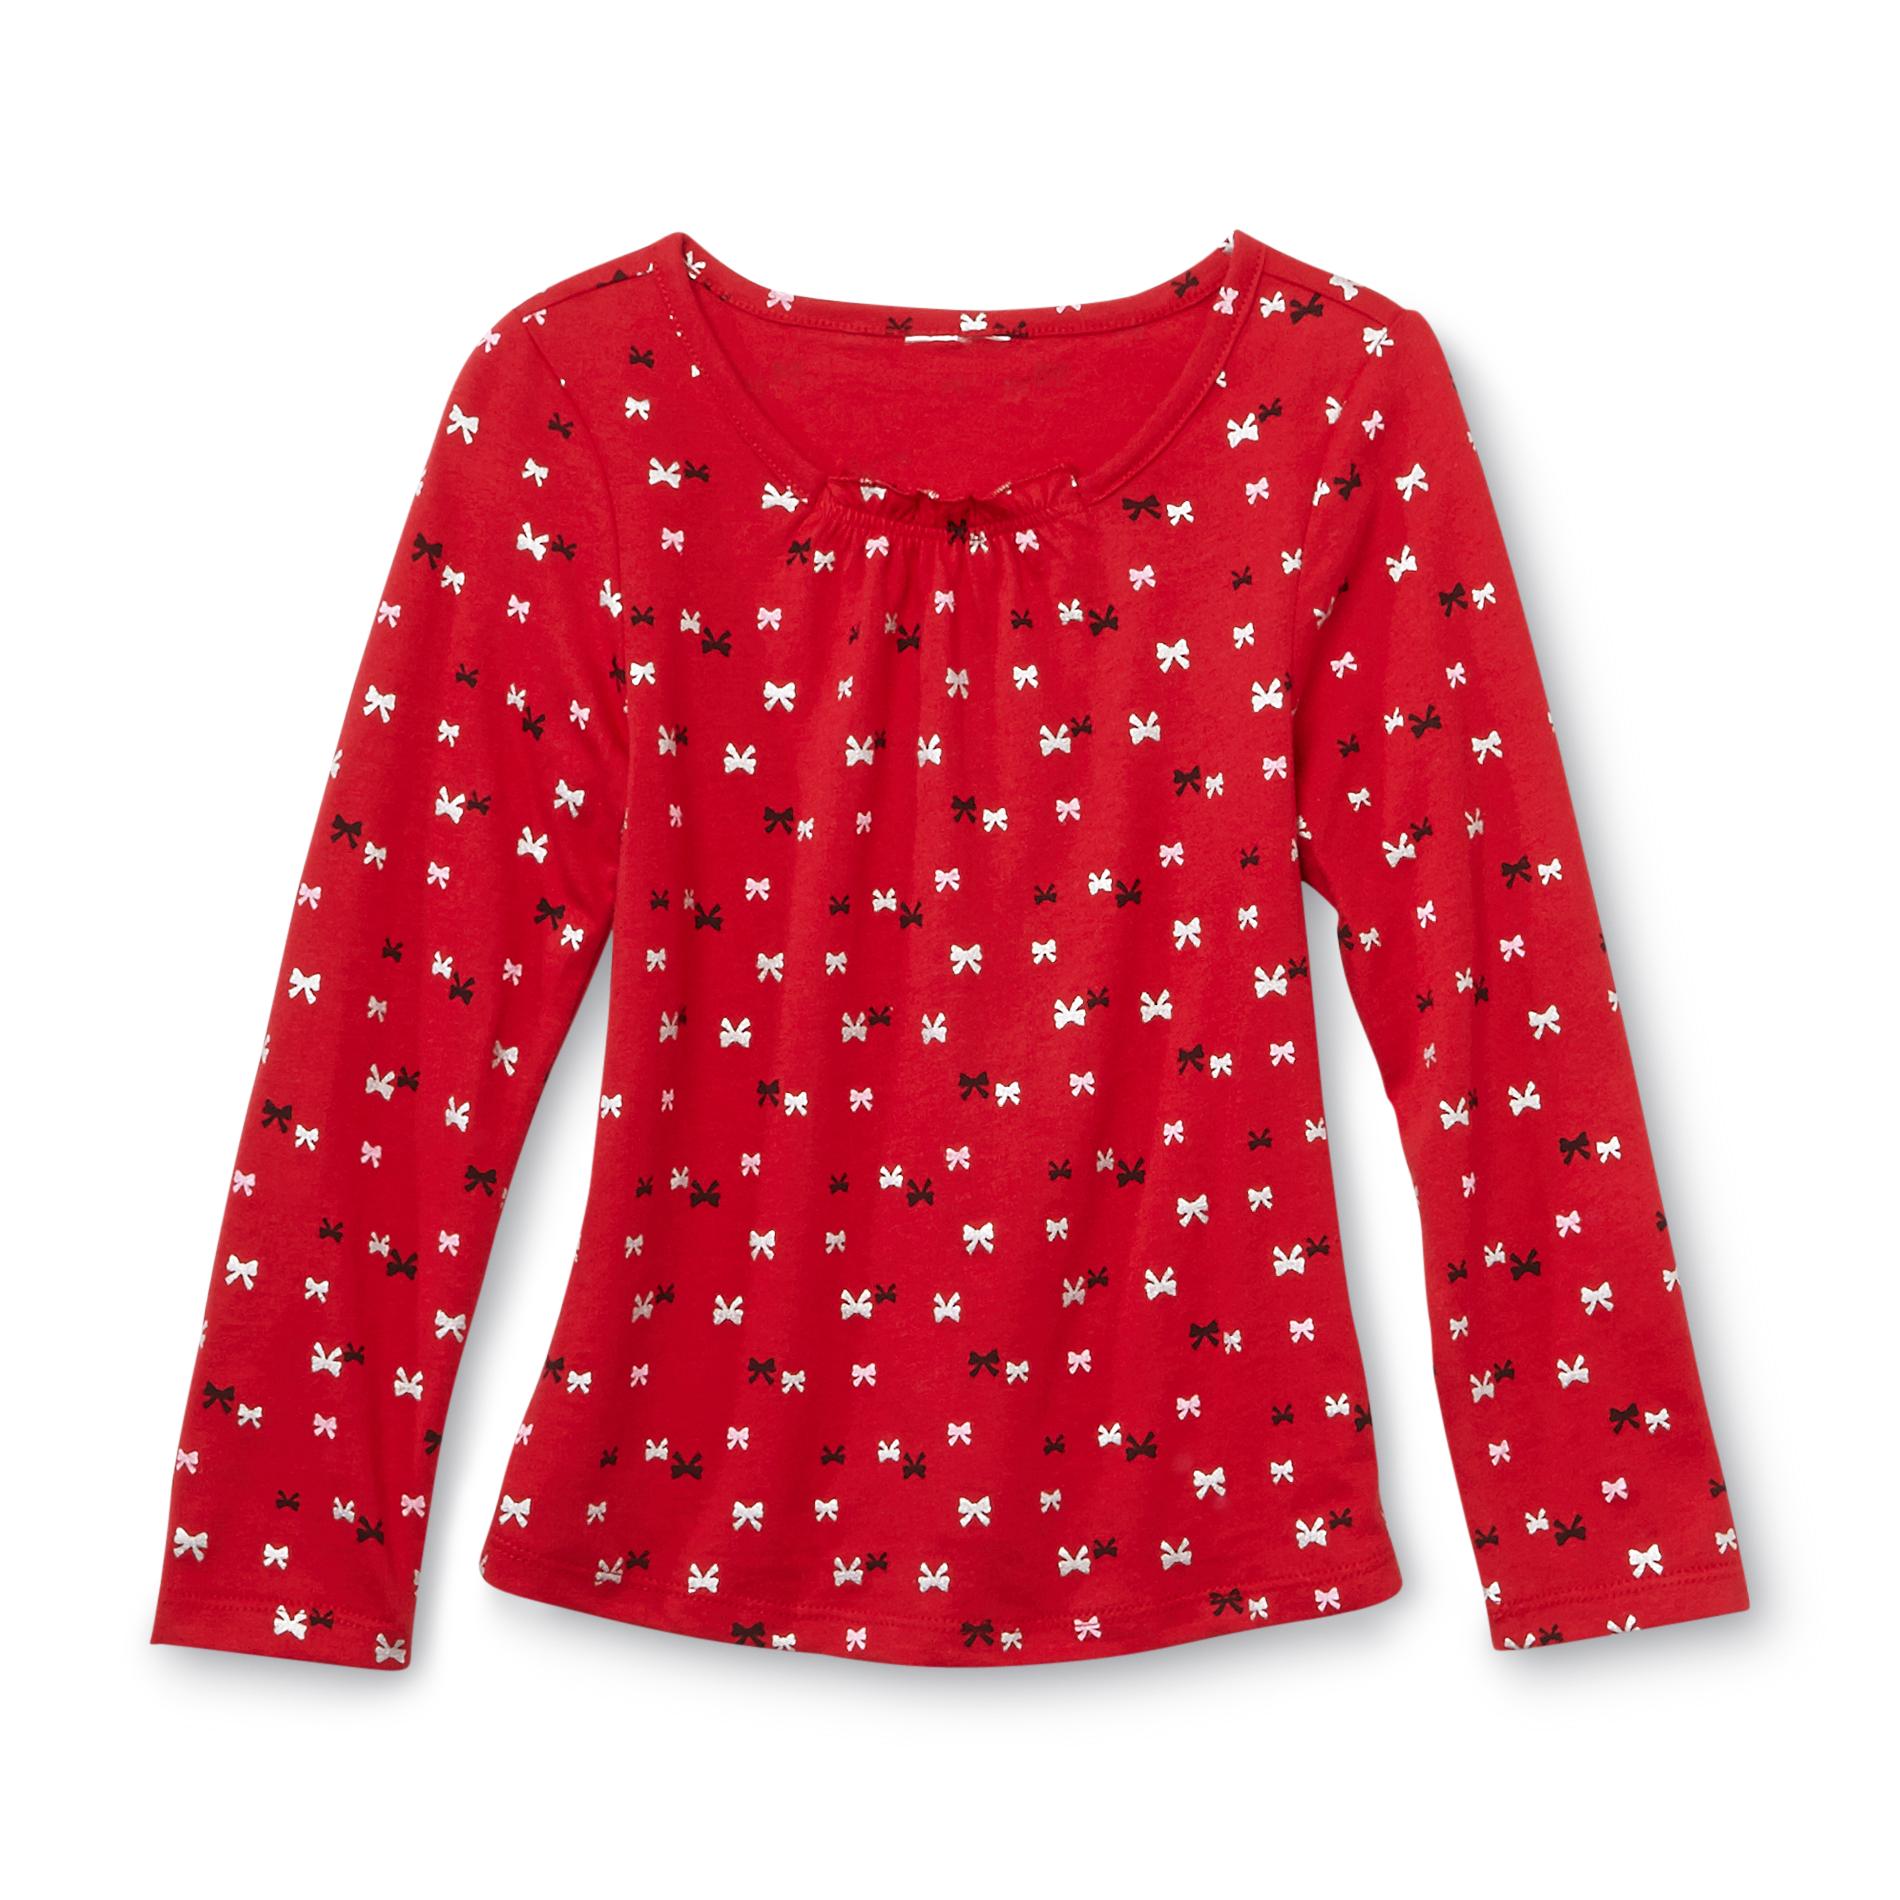 WonderKids Infant & Toddler Girl's Tunic Top - Bows